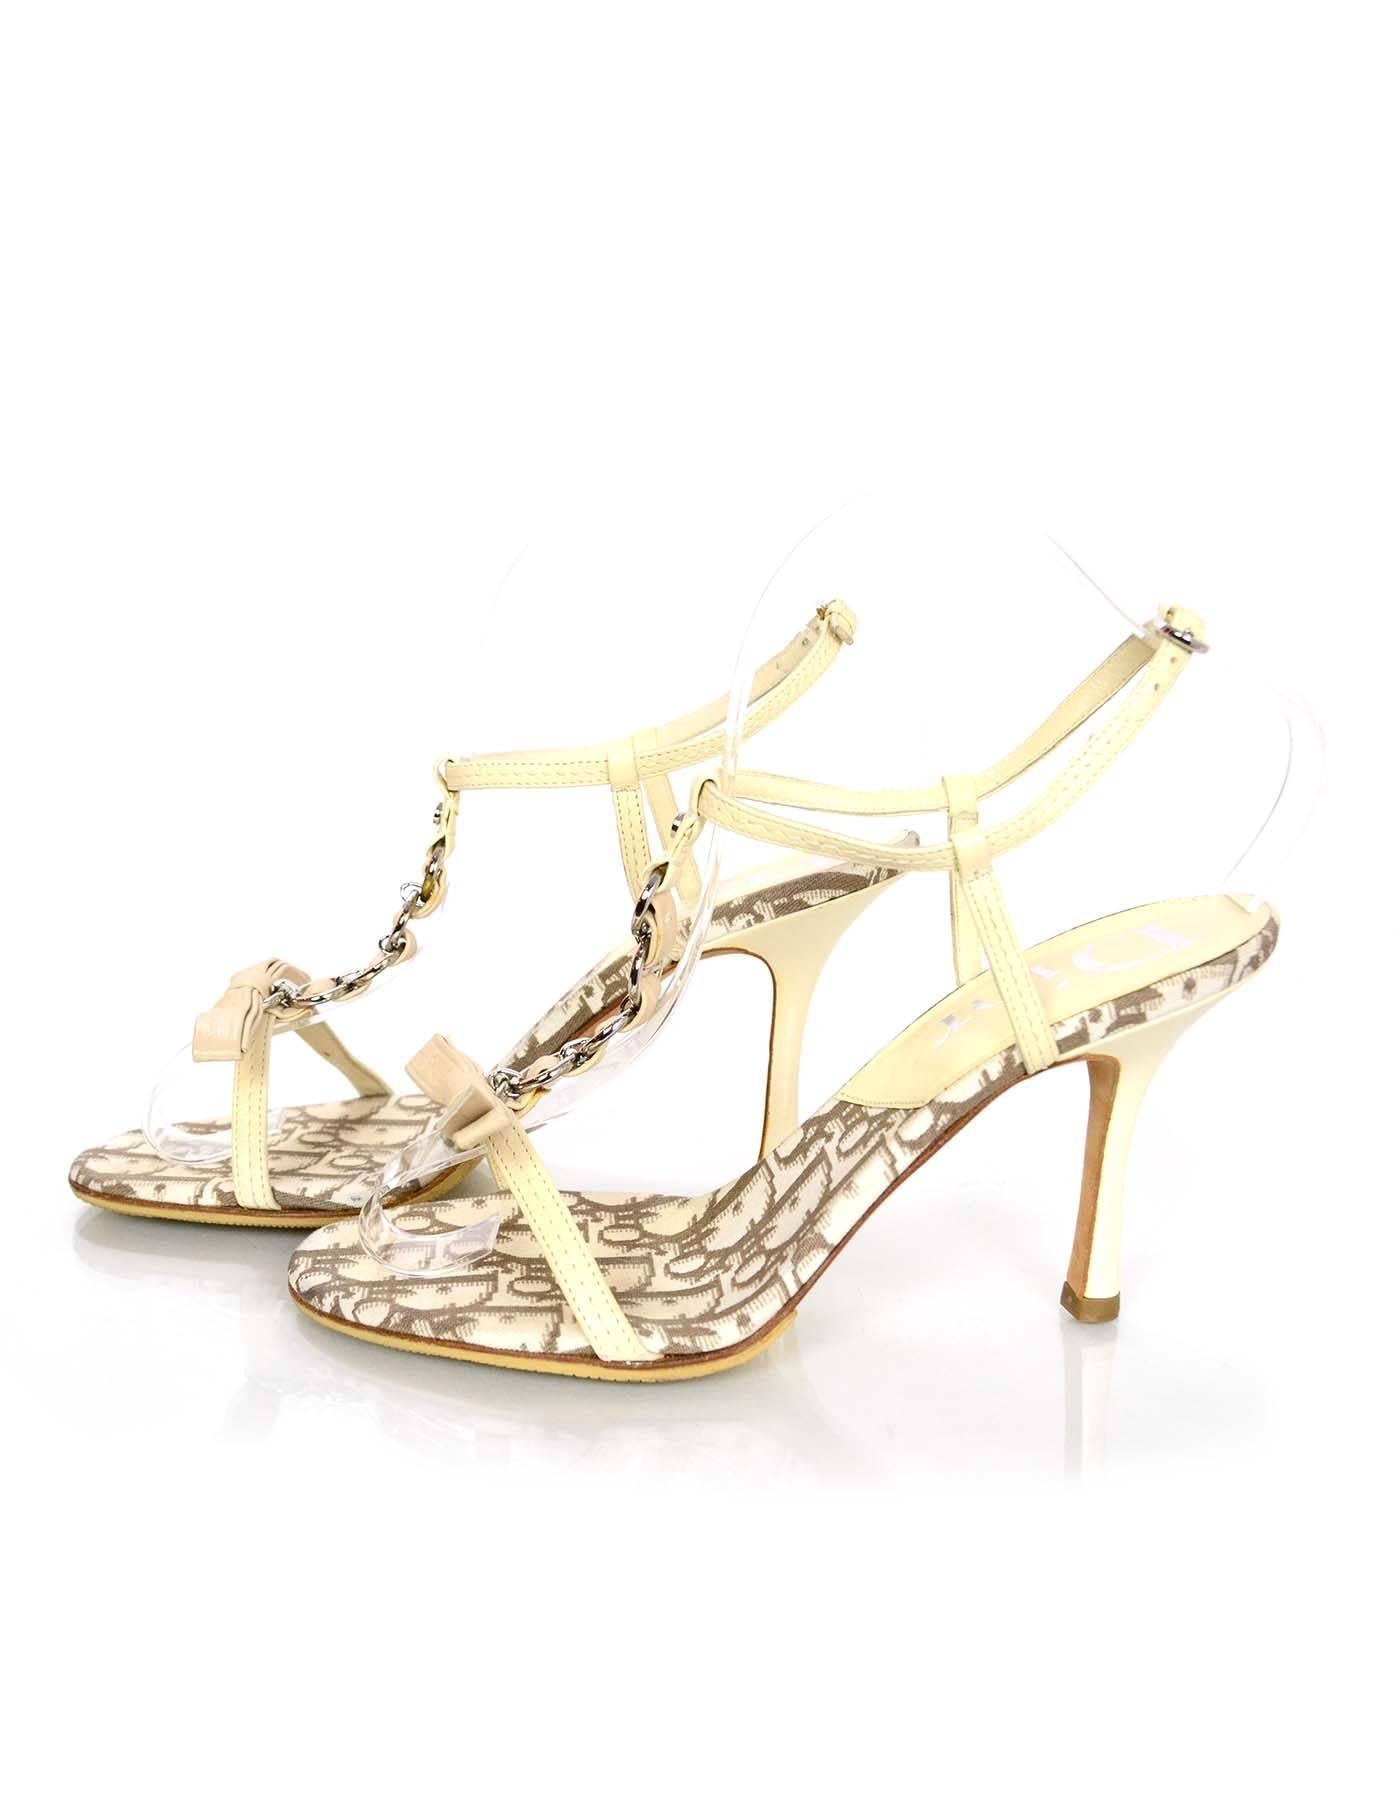 Christian Dior Cream T-Strap Sandals Sz 36.5
Features bow detail at toes

Made In: Italy
Color: Cream/Ivory
Materials: Leather and metal
Closure/Opening: Buckle closure at ankle
Sole Stamp: Dior Made in Italy 36.5
Overall Condition: